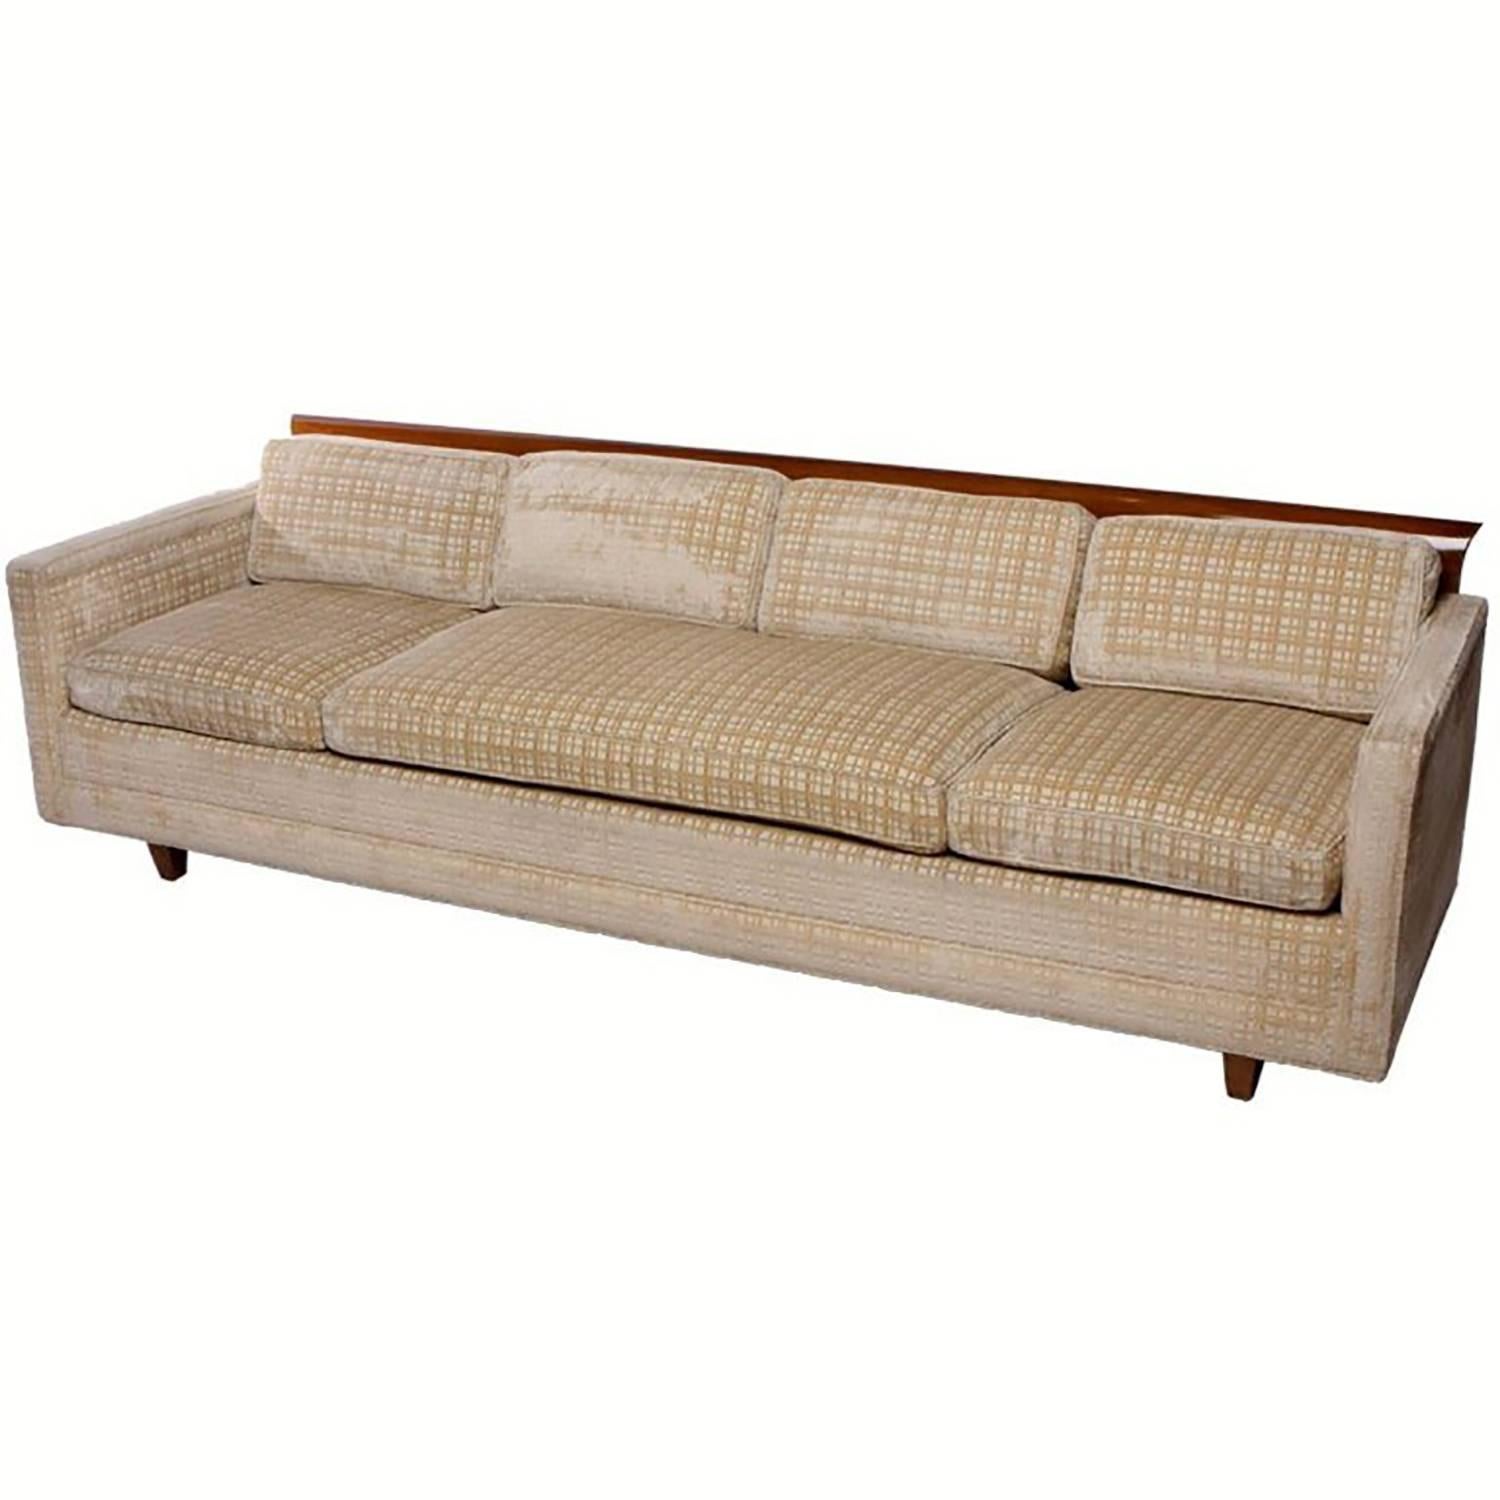 Tuxedo sofa with architecturally curved walnut wood across the top back. Walnut legs and creamy beige crosshatch cut velvet upholstery over down cushions. The light areas on the upholstery is the direction of the NAP and not a defect. The upholstery